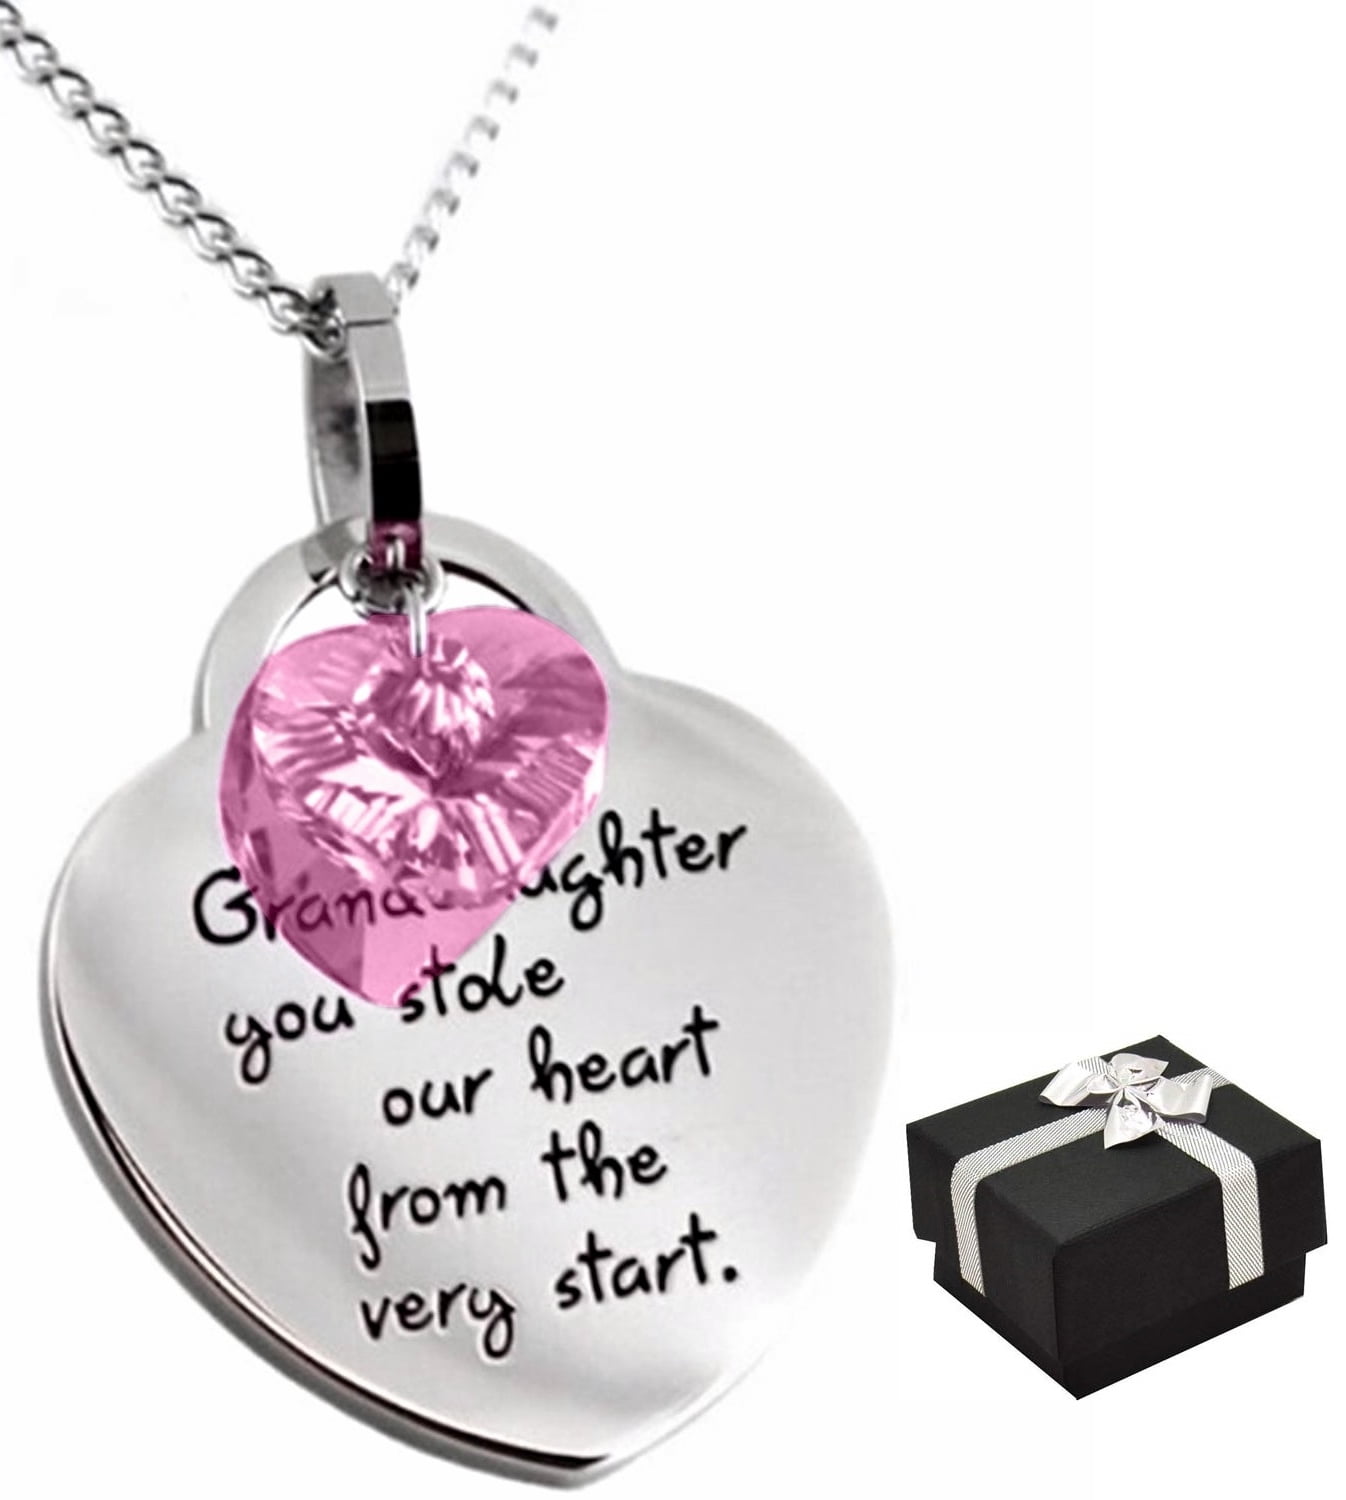 Grandaughter You Stole Our Heart from the Very Start Pendant Necklace